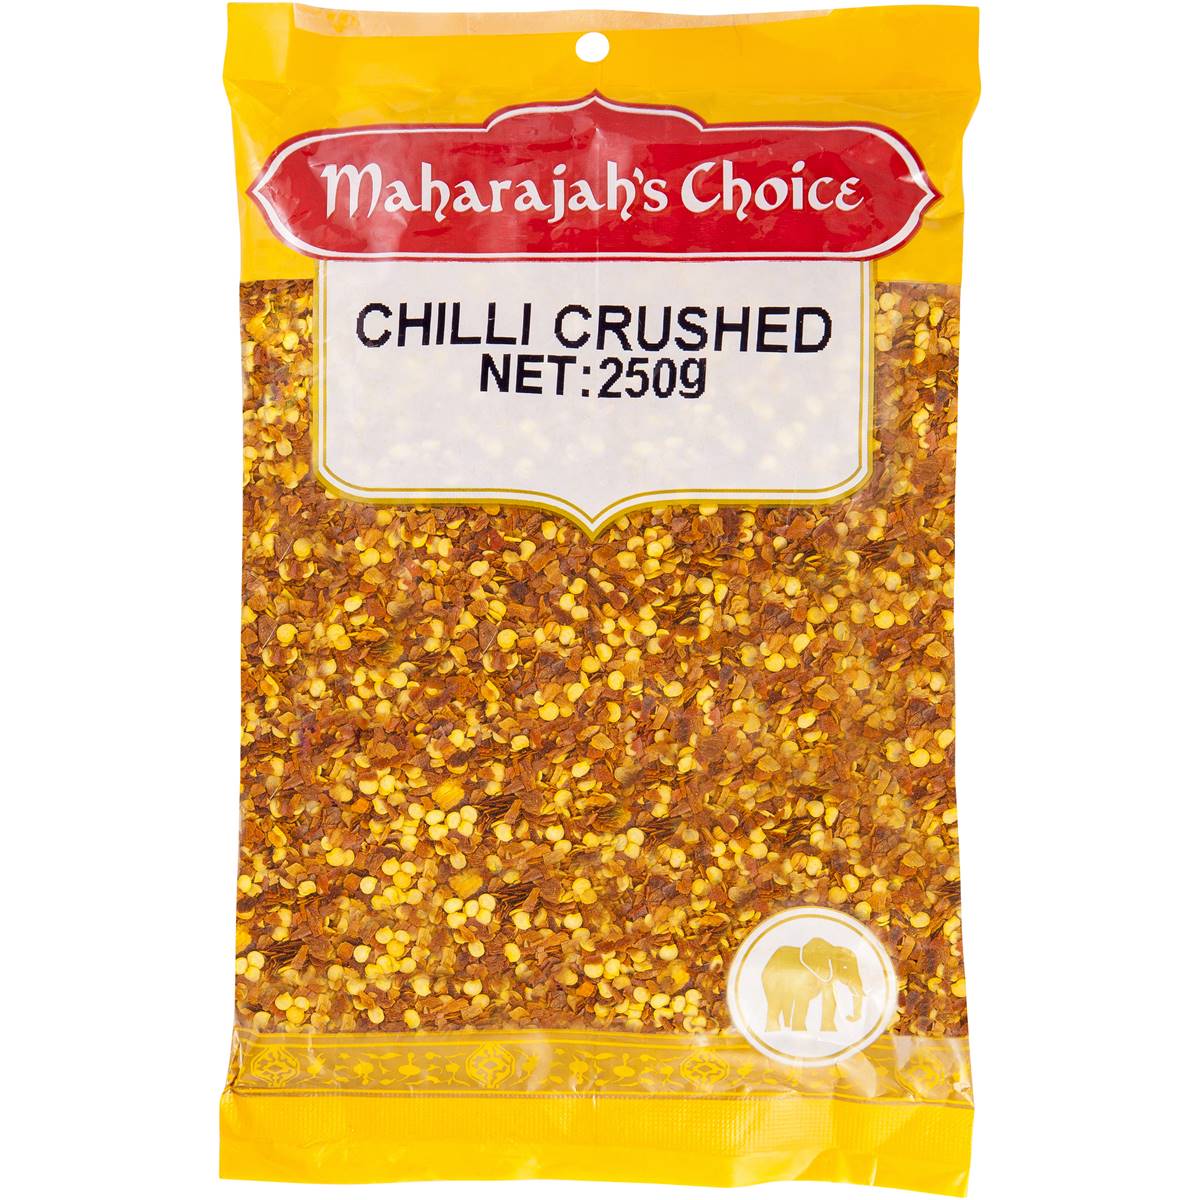 Calories in Maharajah's Choice Crushed Chilli Spice